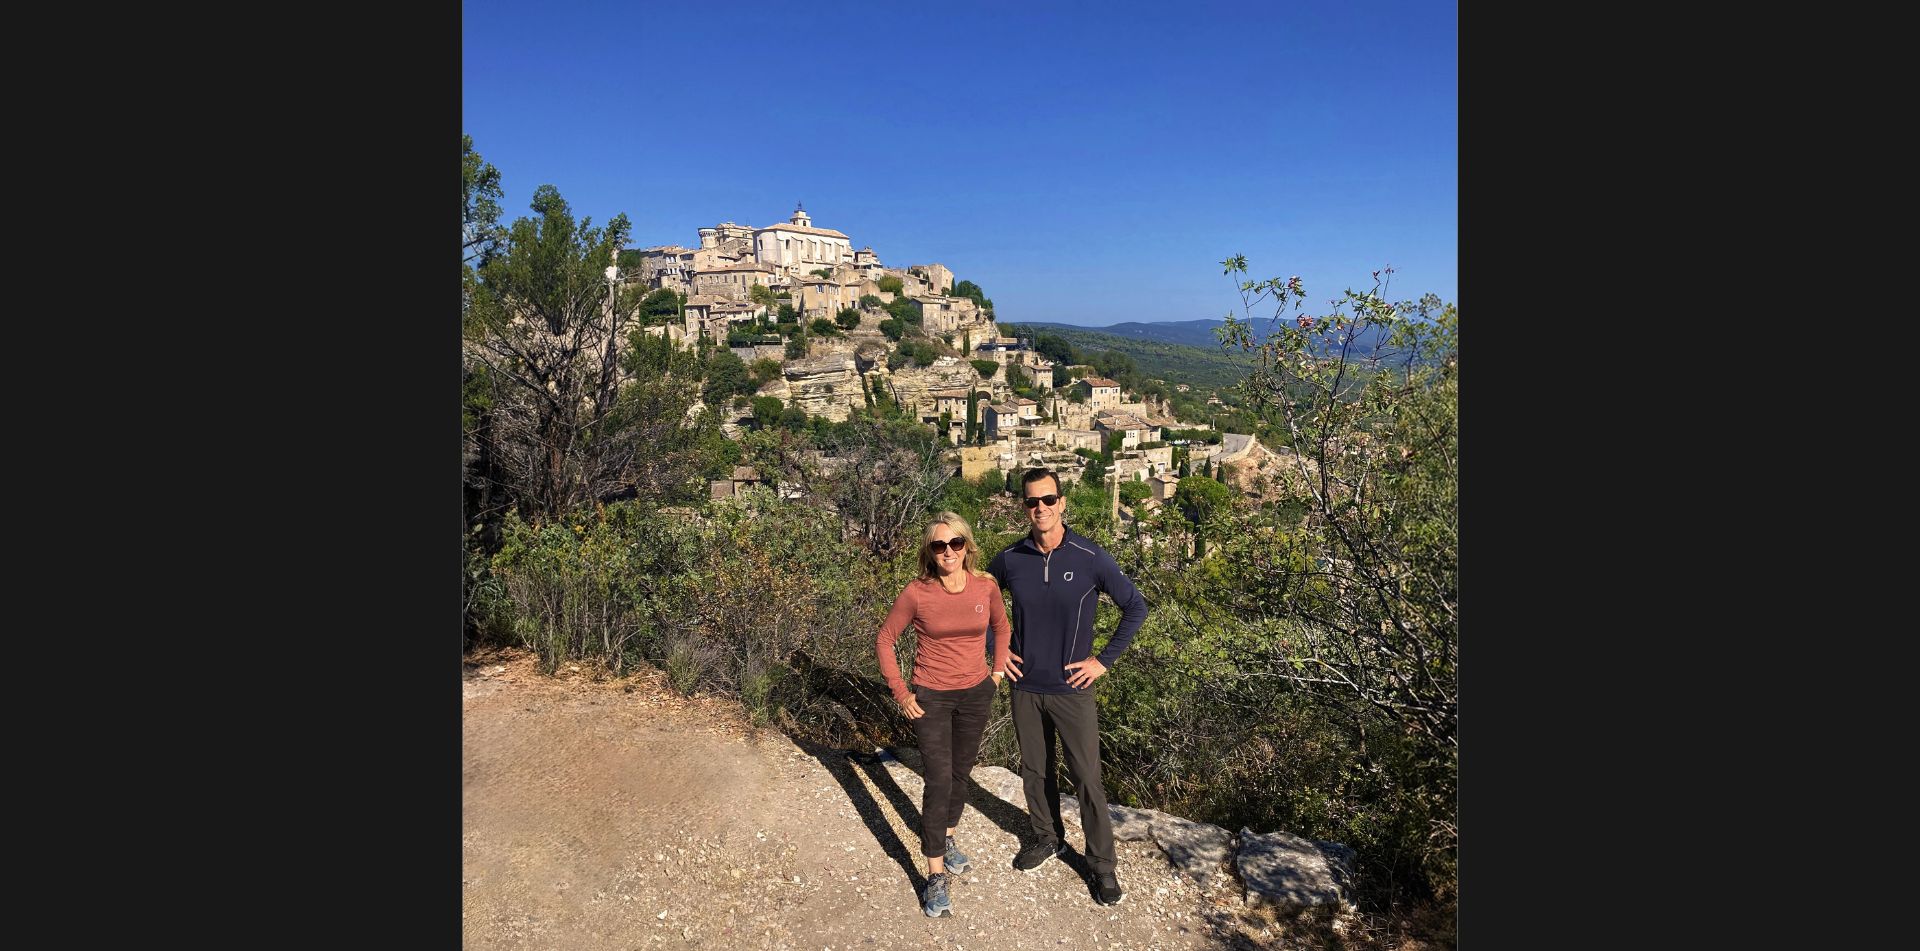 5 - Marvel at the views of Gordes, Provence